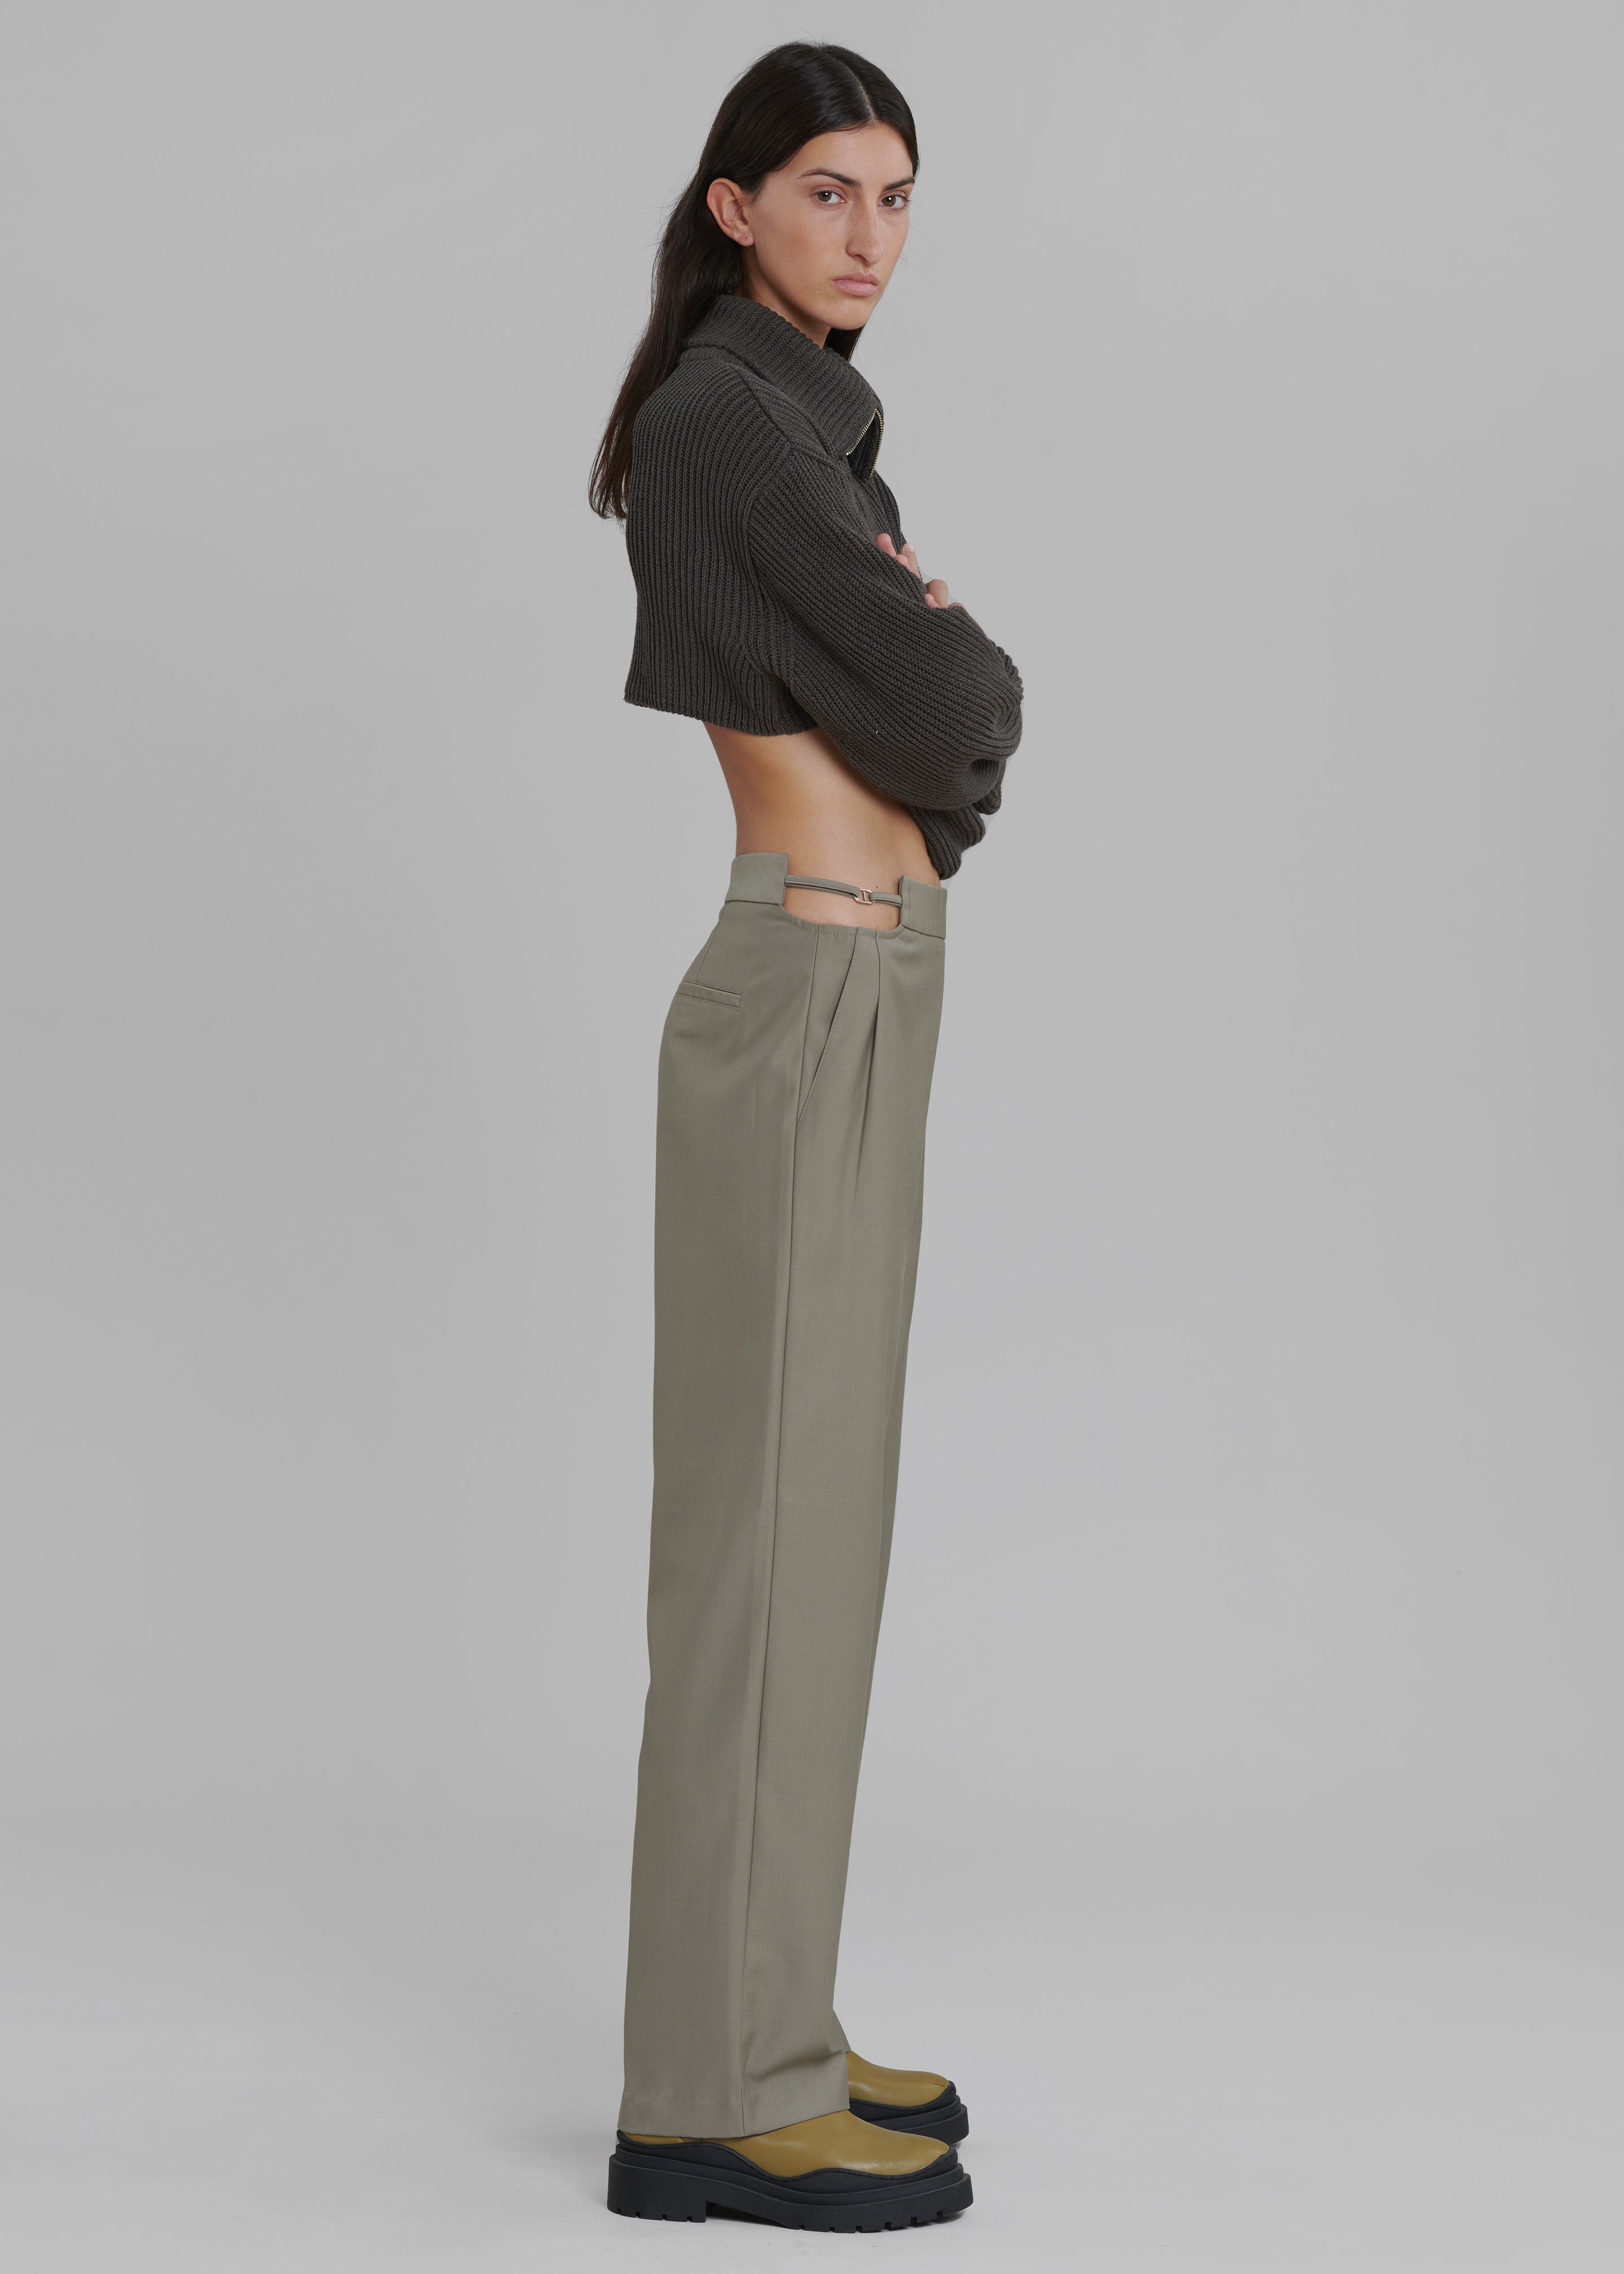 Louise Cut Out Trousers - Olive - 3